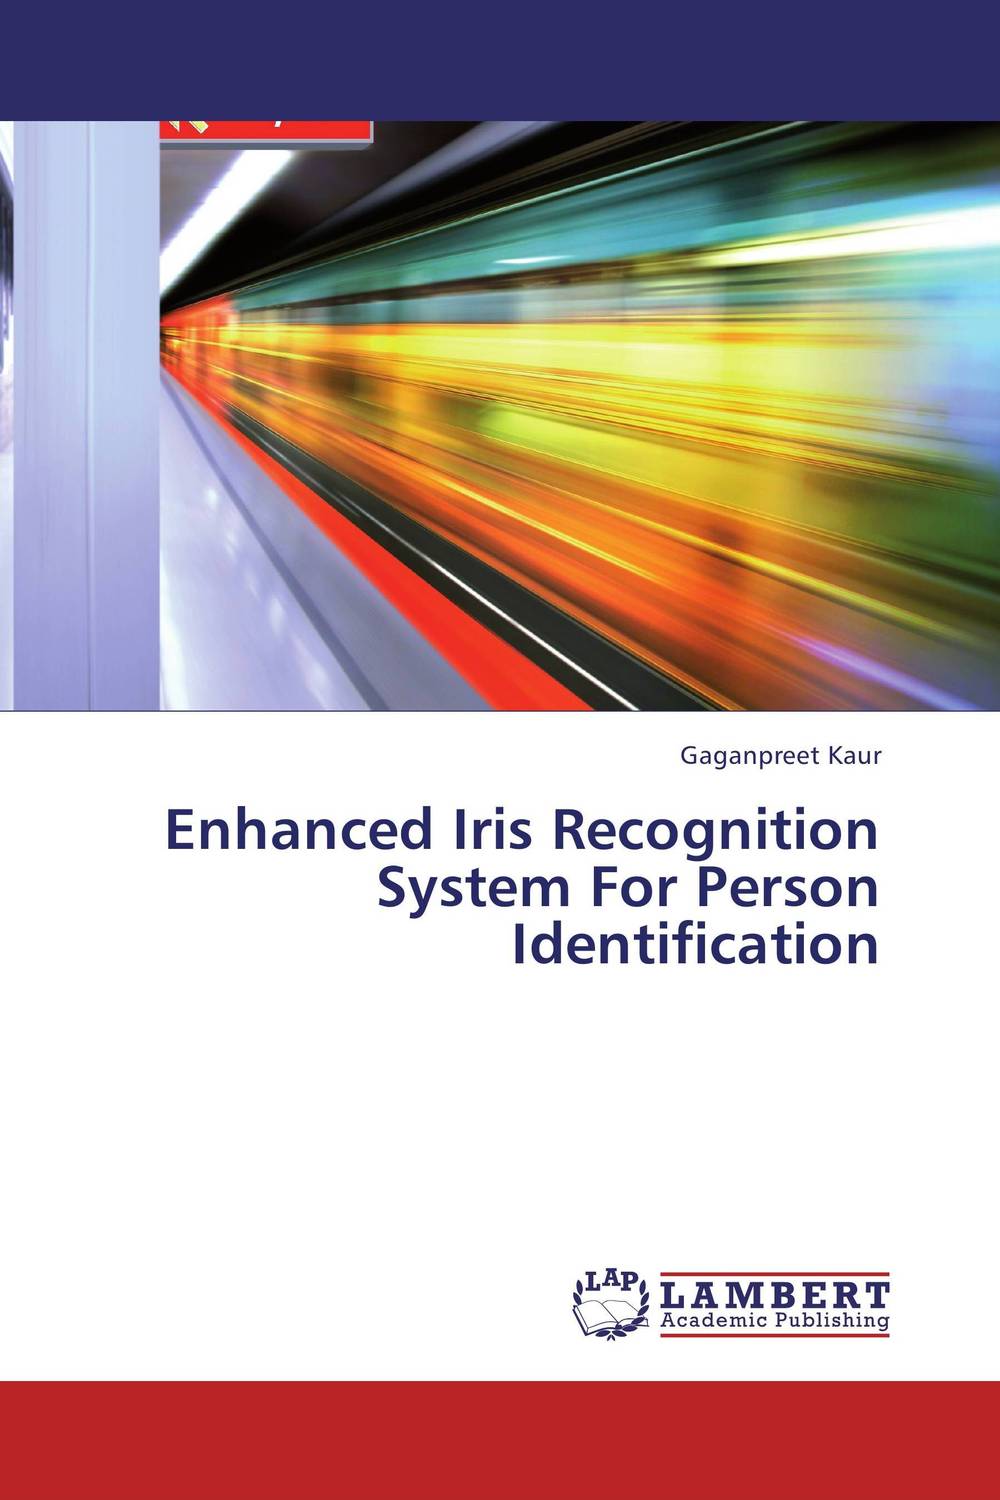 Enhanced Iris Recognition System For Person Identification